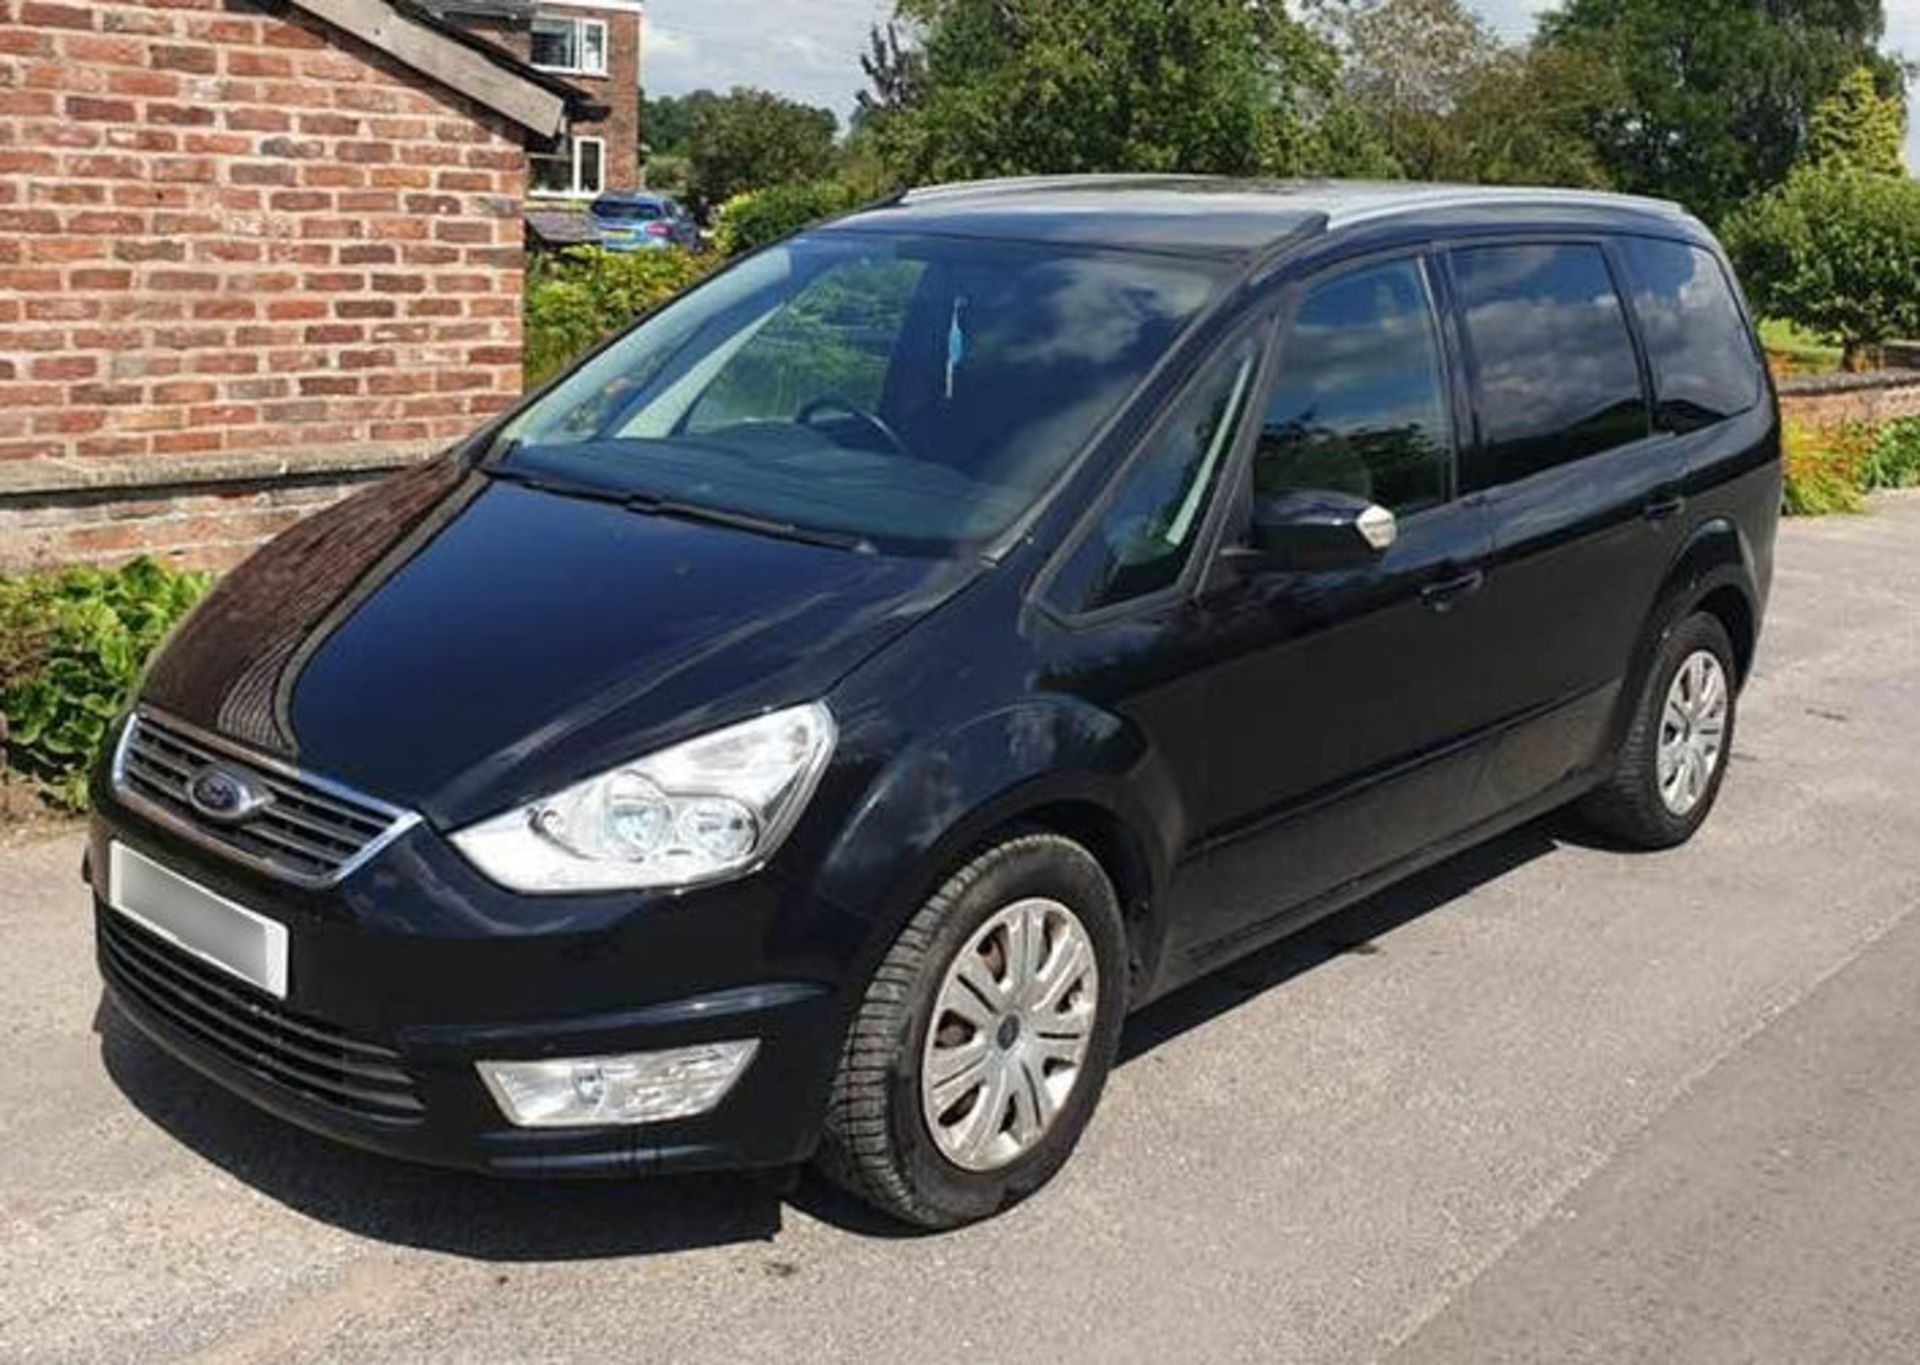 1 x 2014 Ford Galaxy 7-Seater Diesel MPV - Automatic - Black - 126000 Miles - CL331 - Location: